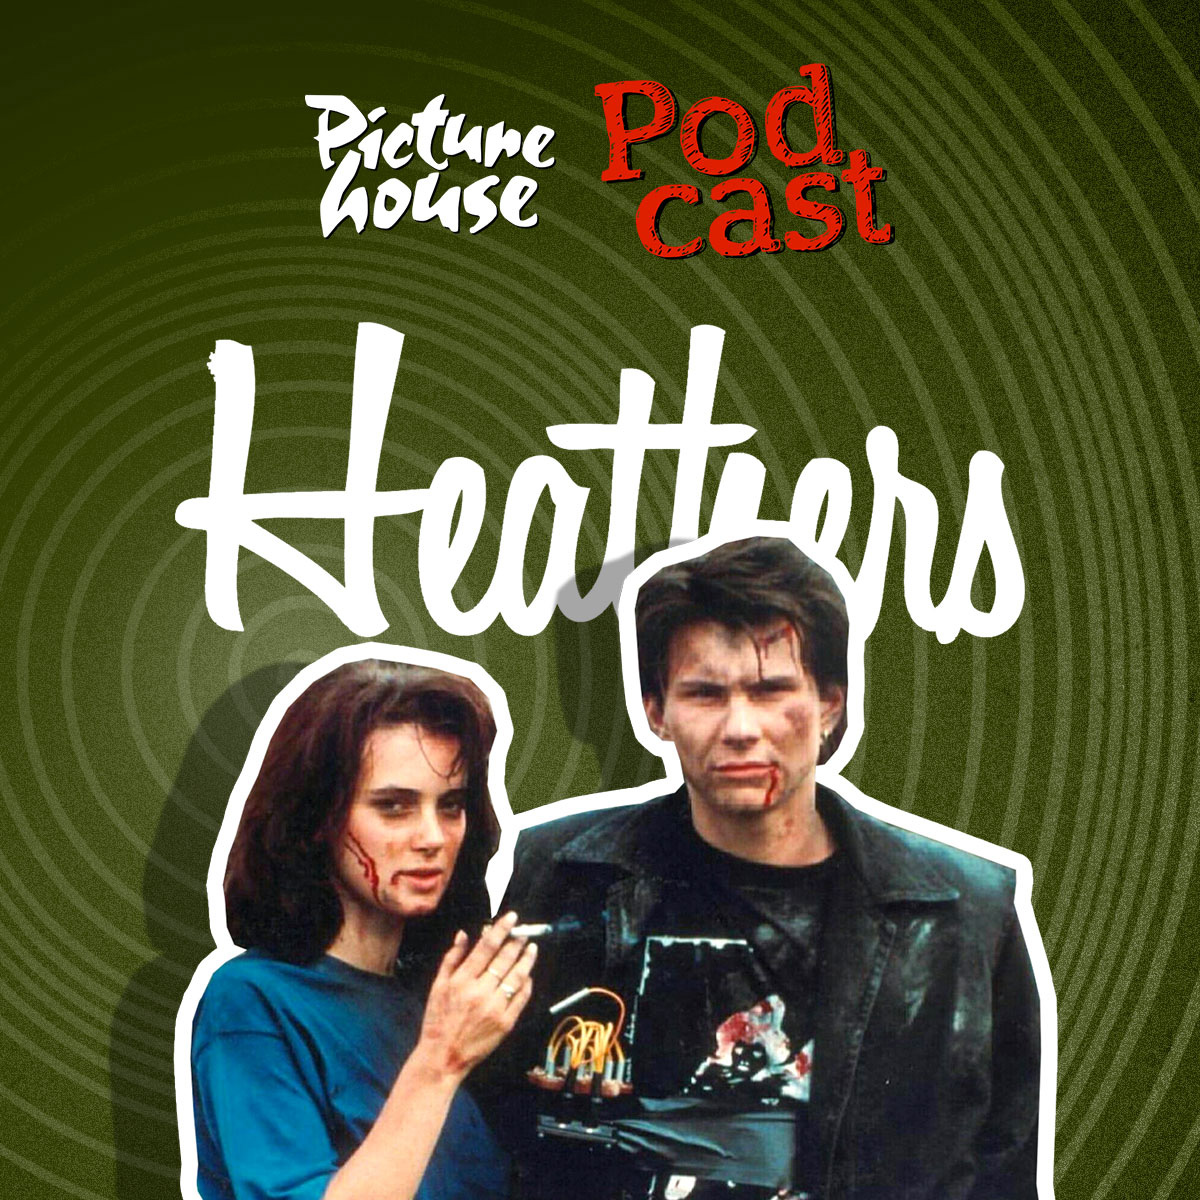 Heathers with Michael Lehmann and Lisanne Falk | Picturehouse Podcast